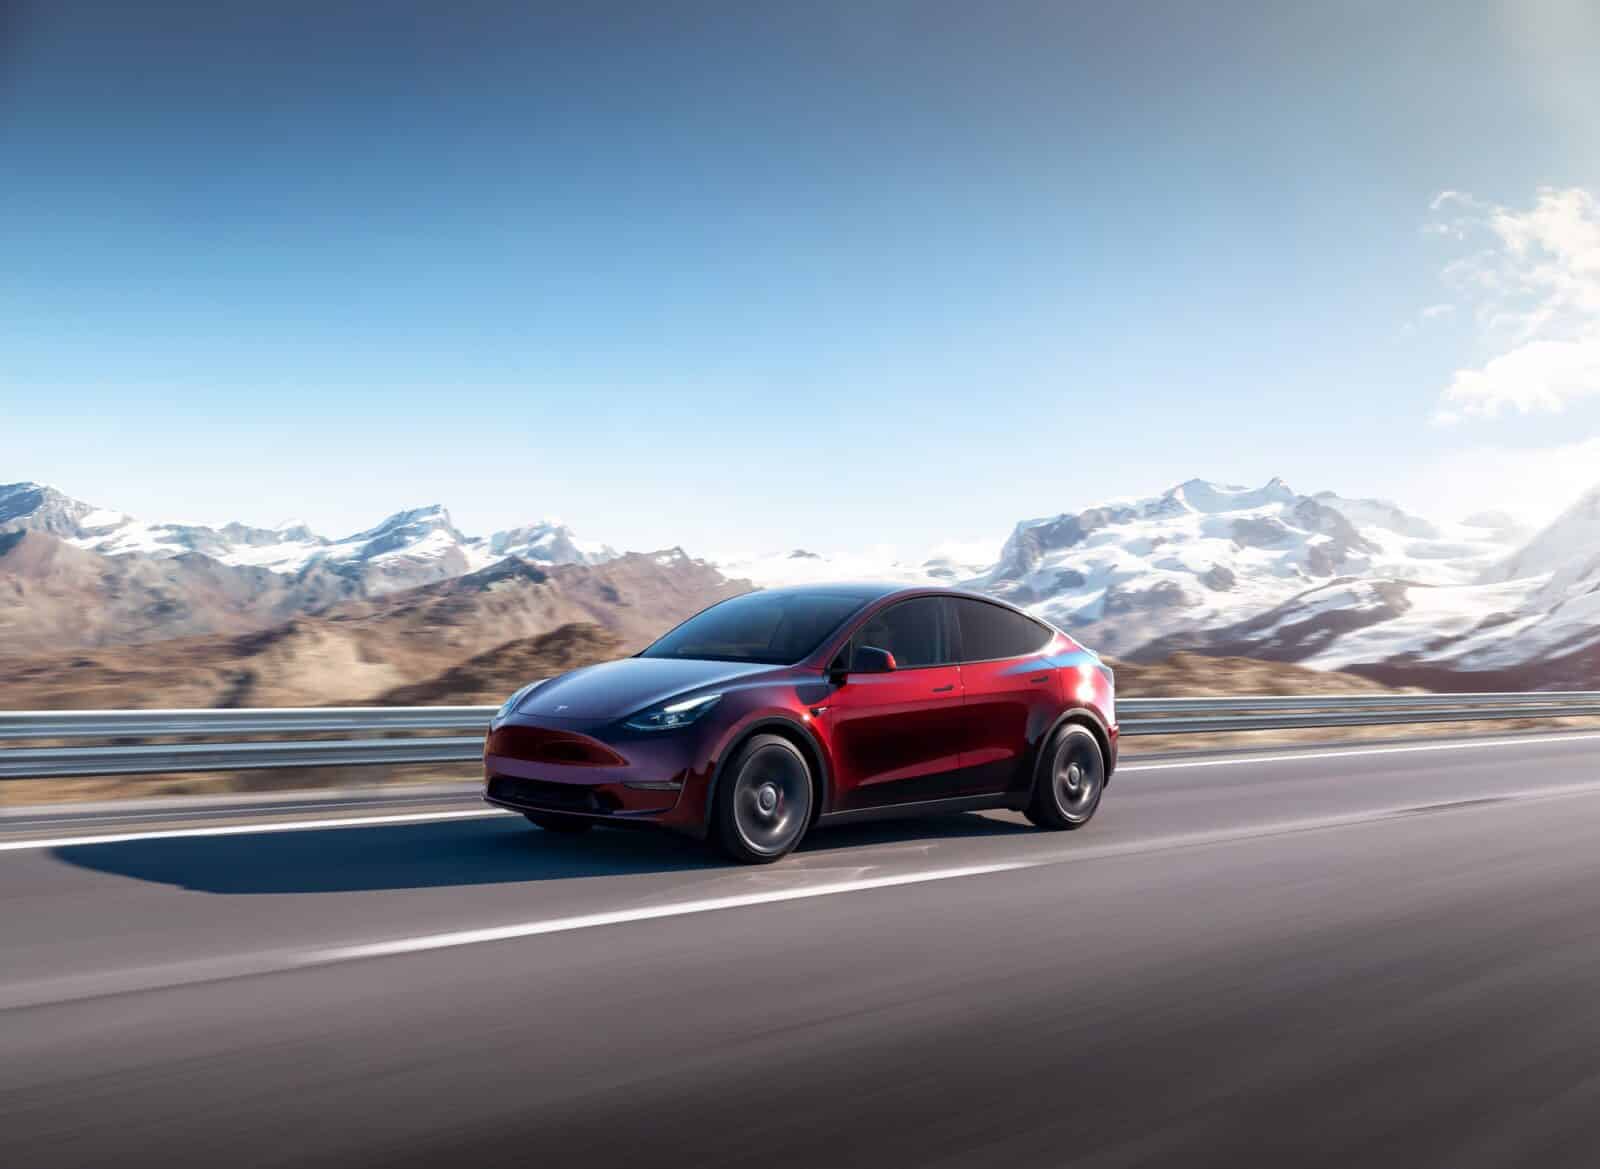 The California Manufacturers And Technology Association (Cmta) Hailed This Electric Beauty As The &Quot;Coolest Thing Made In California&Quot;. Model Y. Photo Courtesy Of Tesla, Inc.